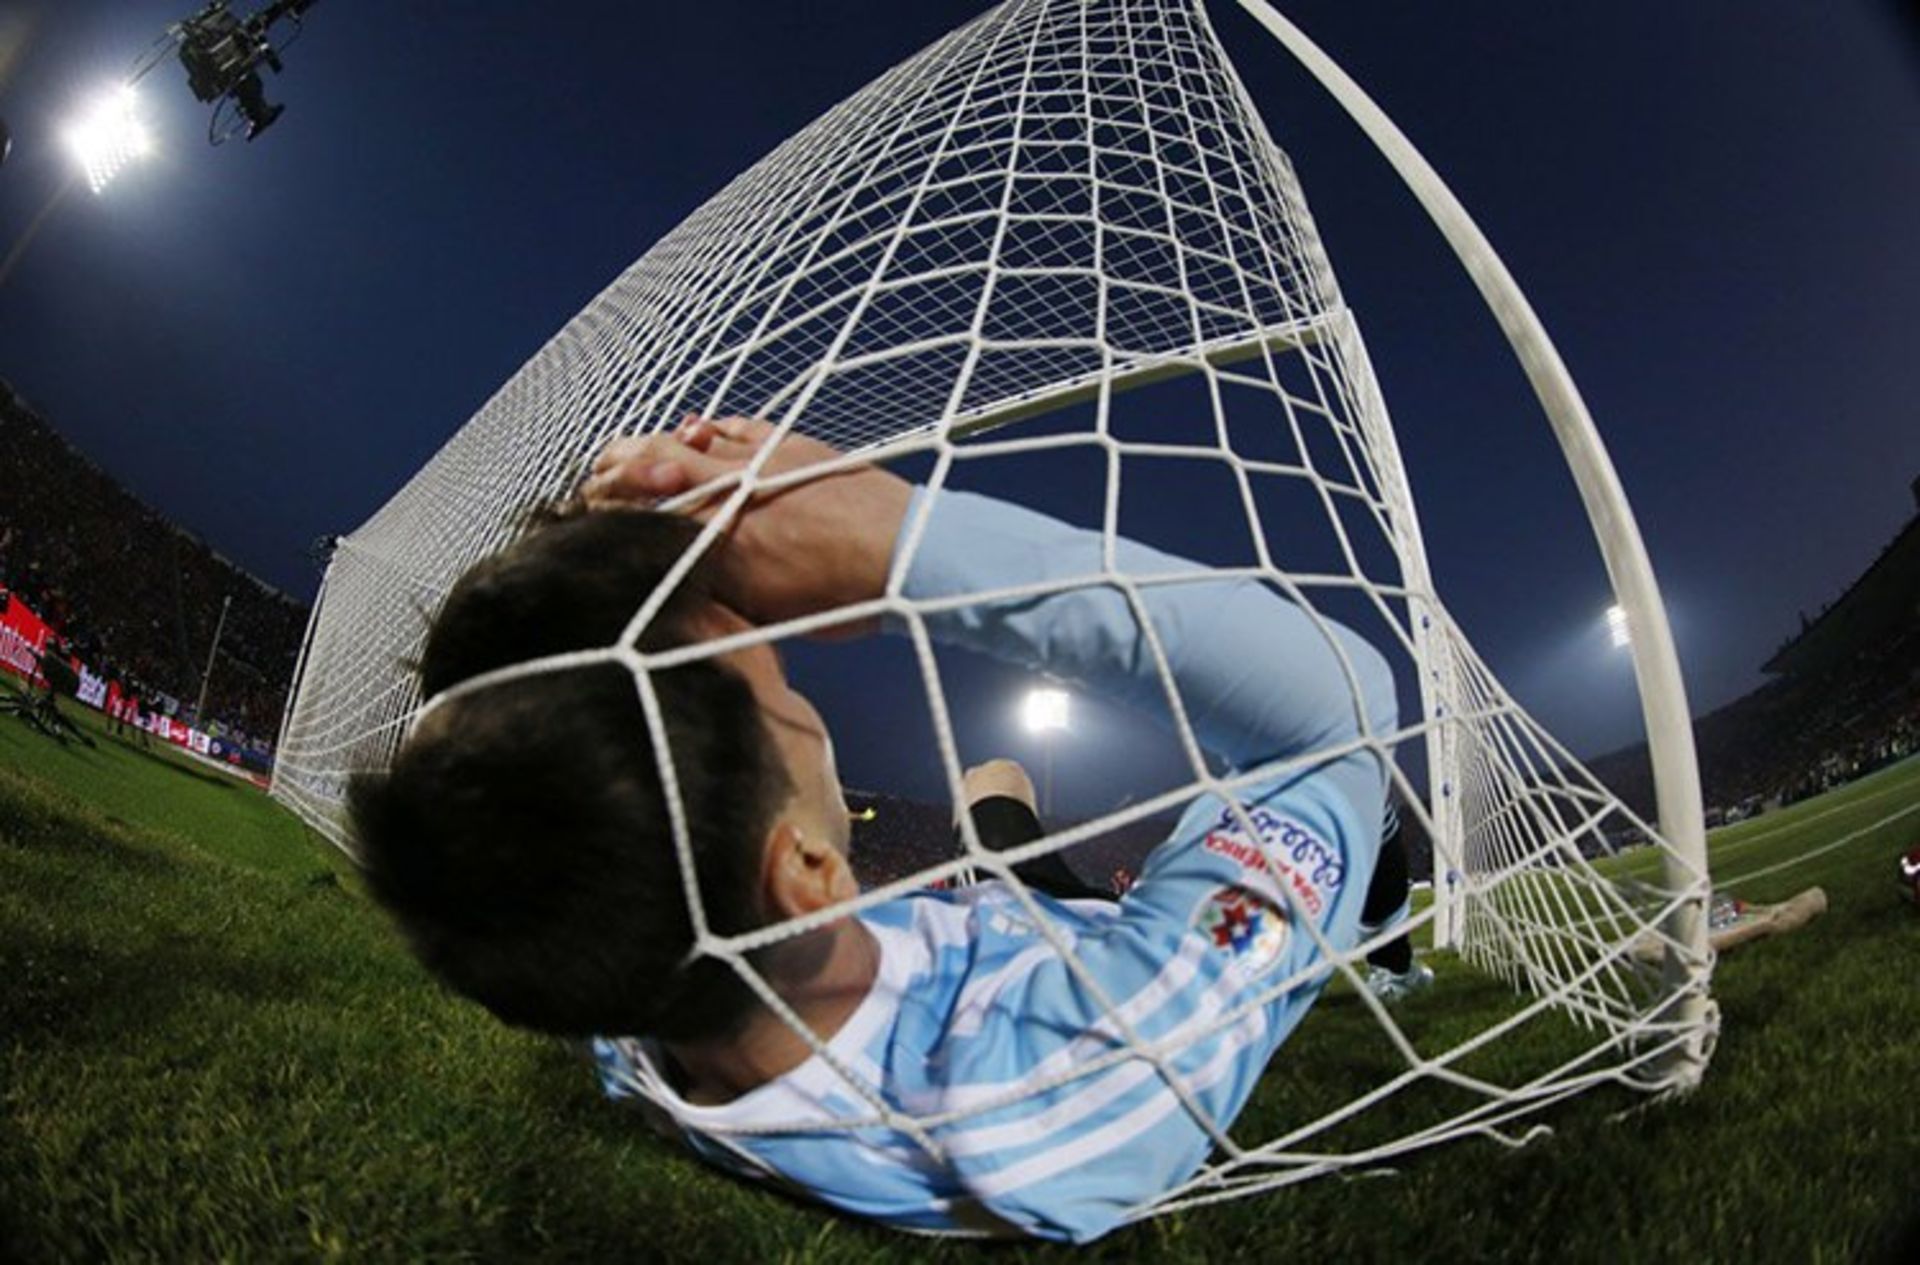 6 argentinas lionel messi falls in the net during the copa america 2015 final soccer match against chile at the national stadium in santiago chile s fd8bf